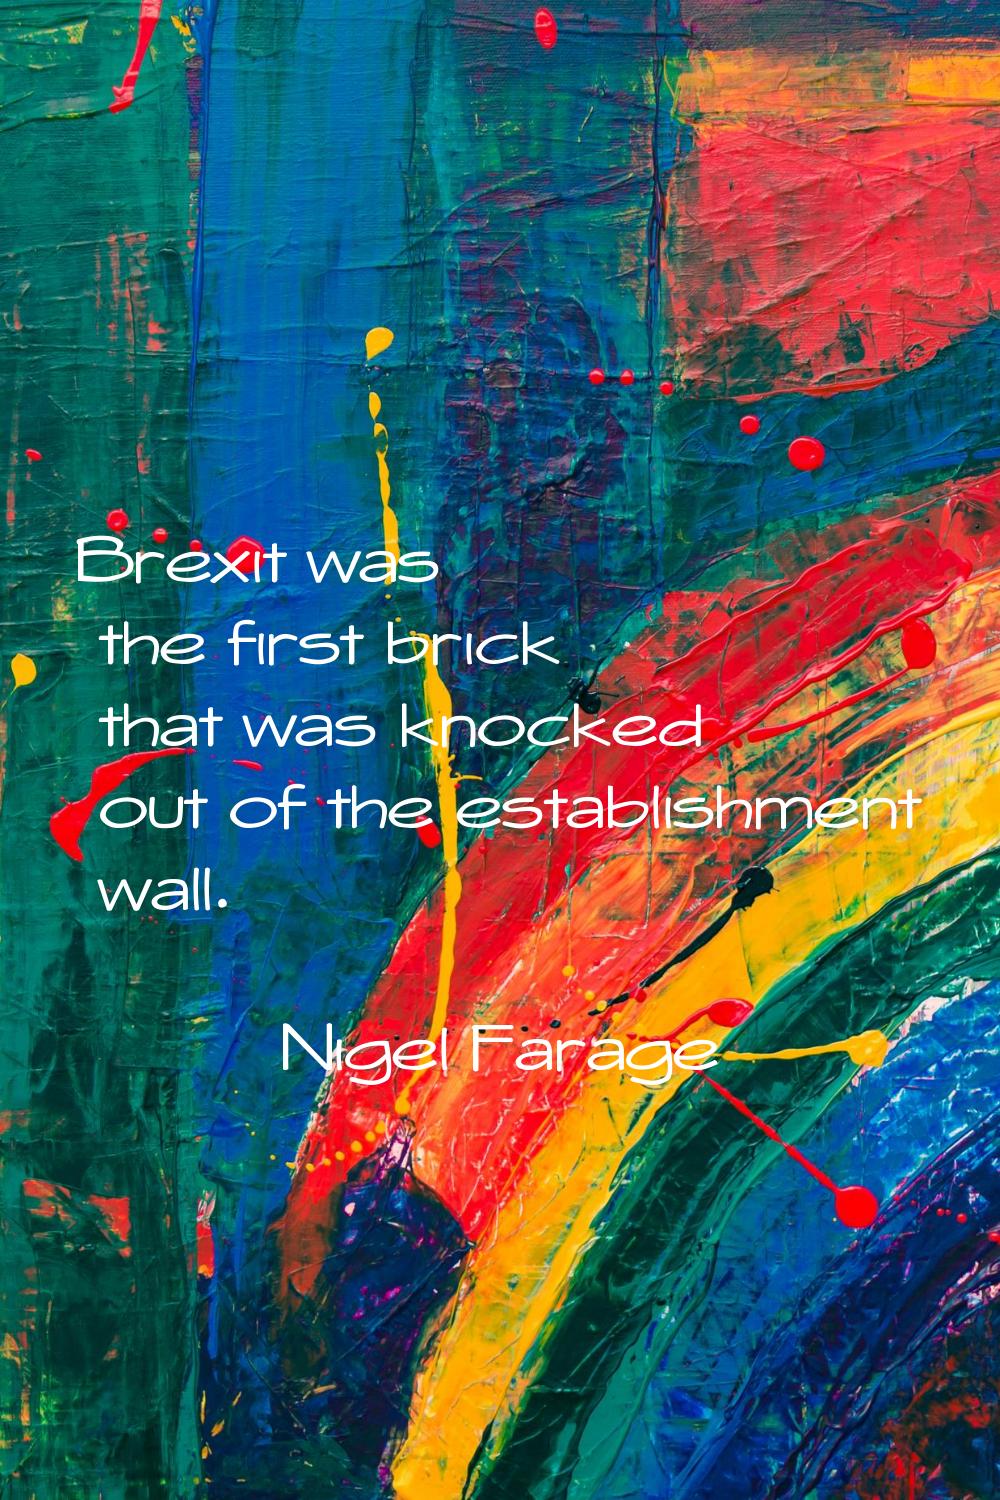 Brexit was the first brick that was knocked out of the establishment wall.